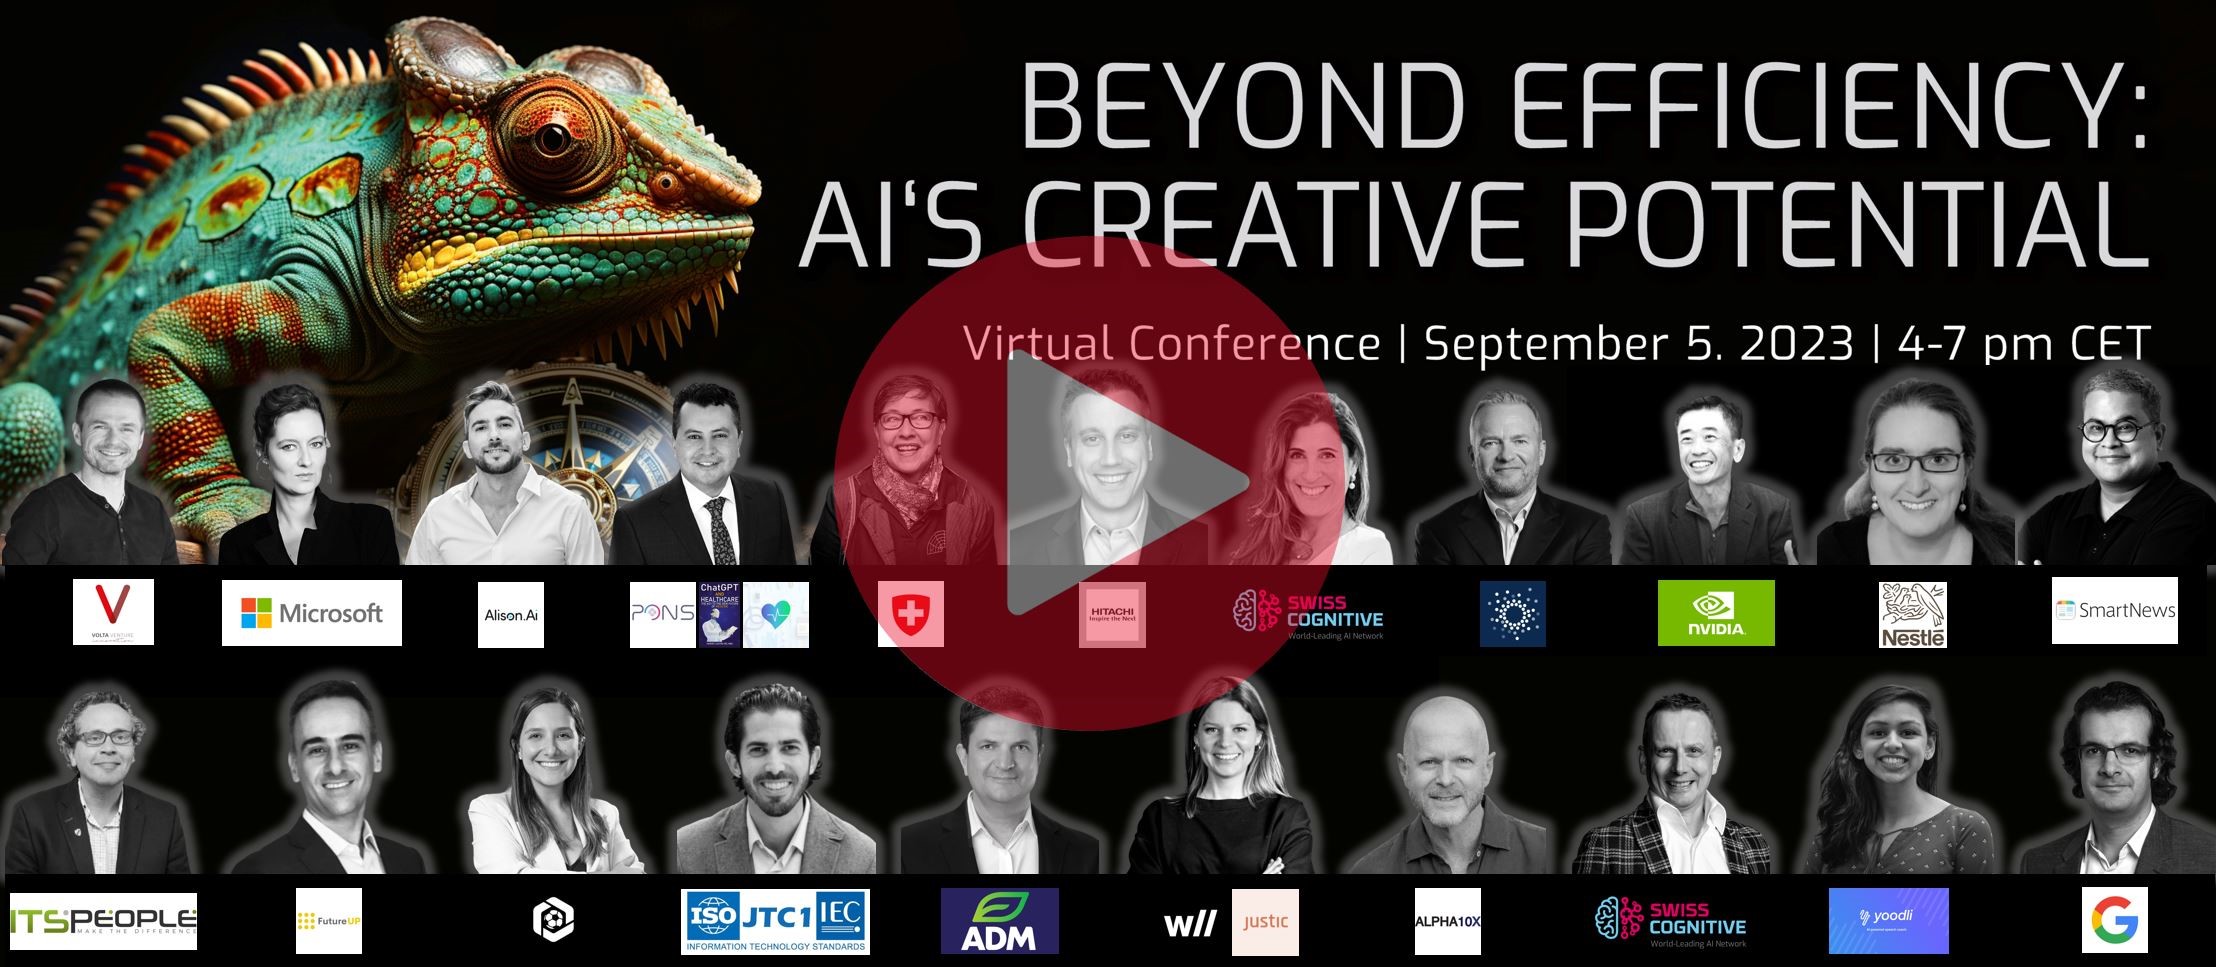 Beyond_Efficiency_AI_Creative_Potential_SwissCognitive_World-Leading_AI_Network_Post_Event